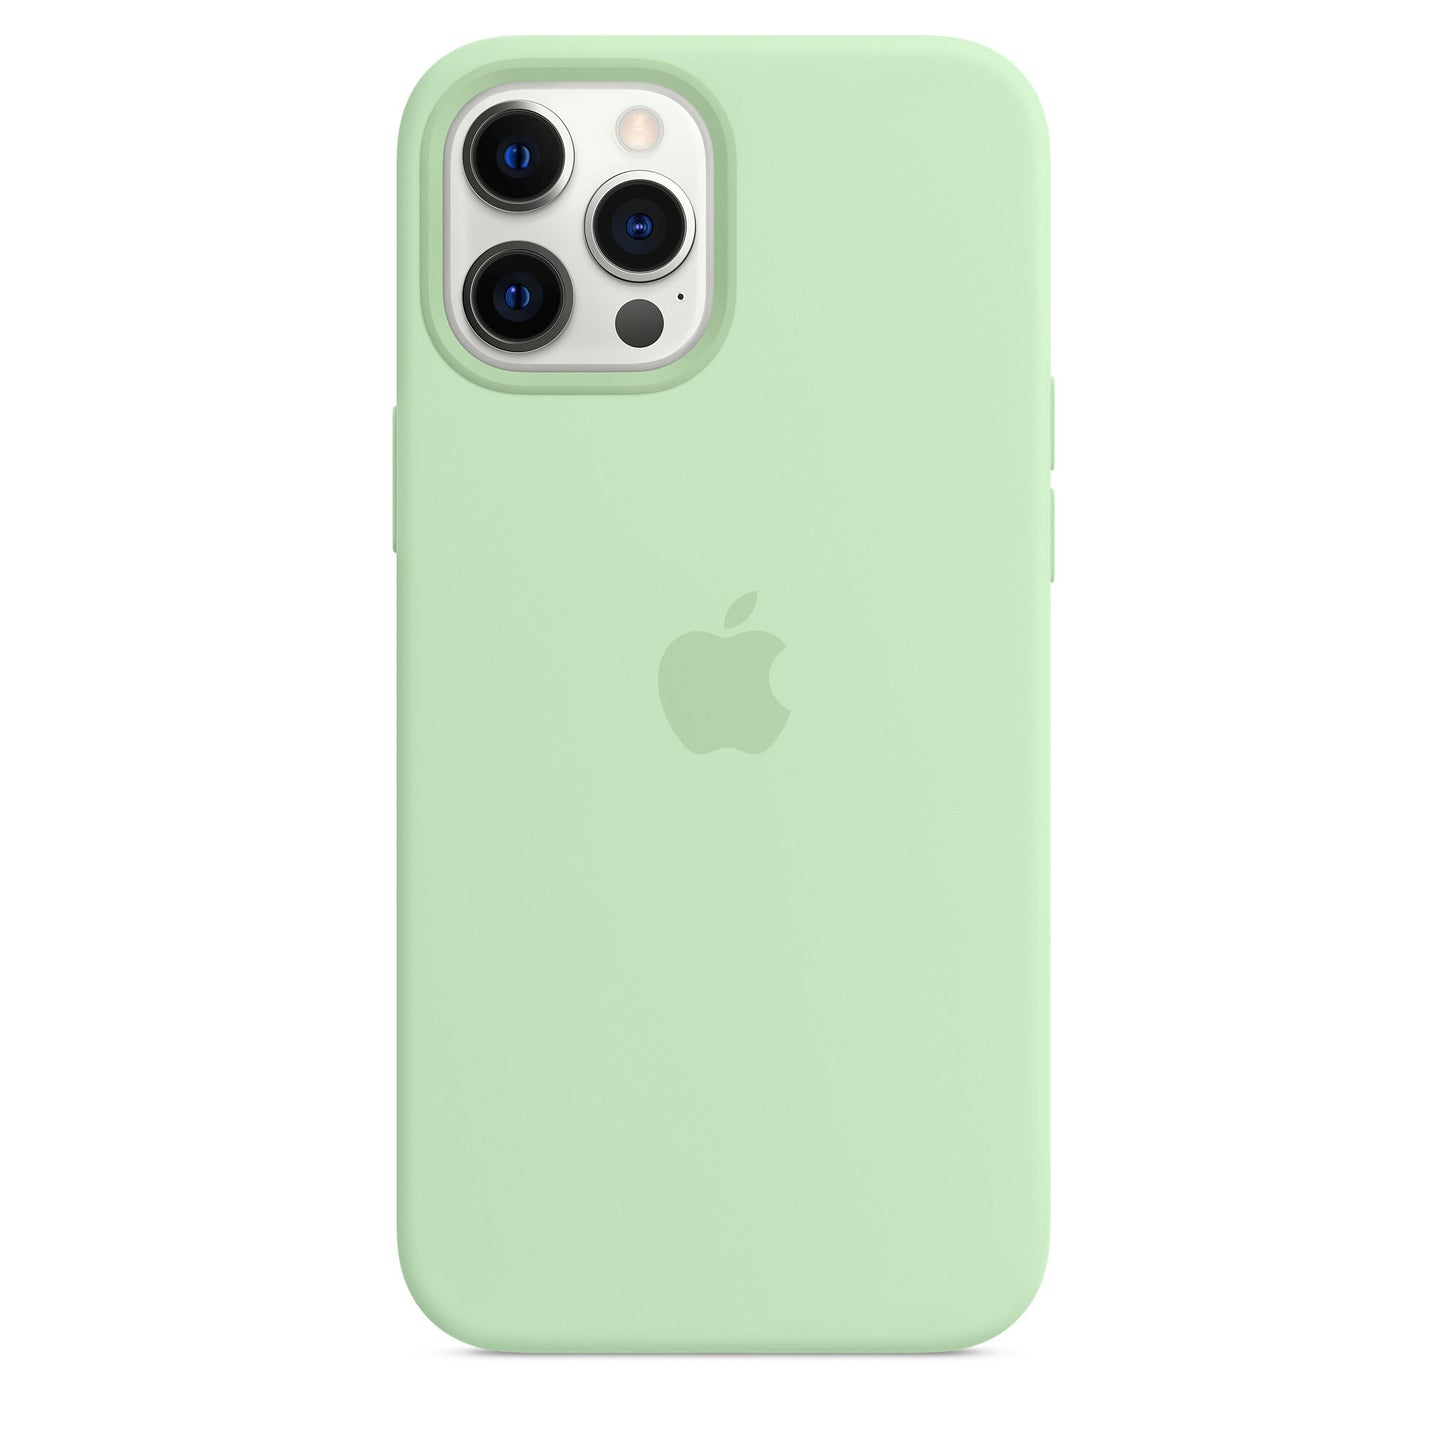 iPhone 12 Pro Max Silicone Case with MagSafe - Pistachio